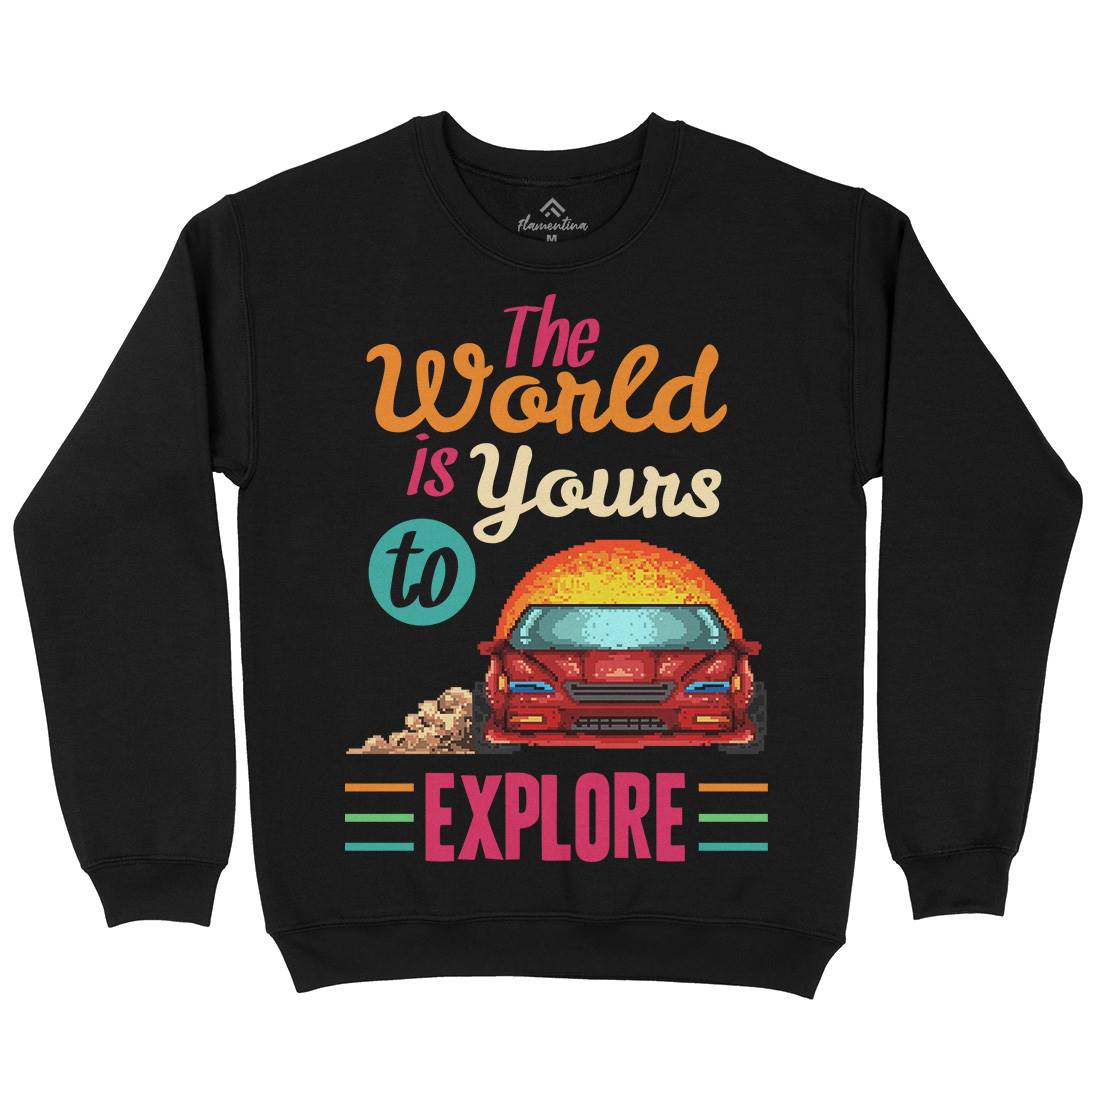 The World Is Yours To Explore Mens Crew Neck Sweatshirt Cars B970